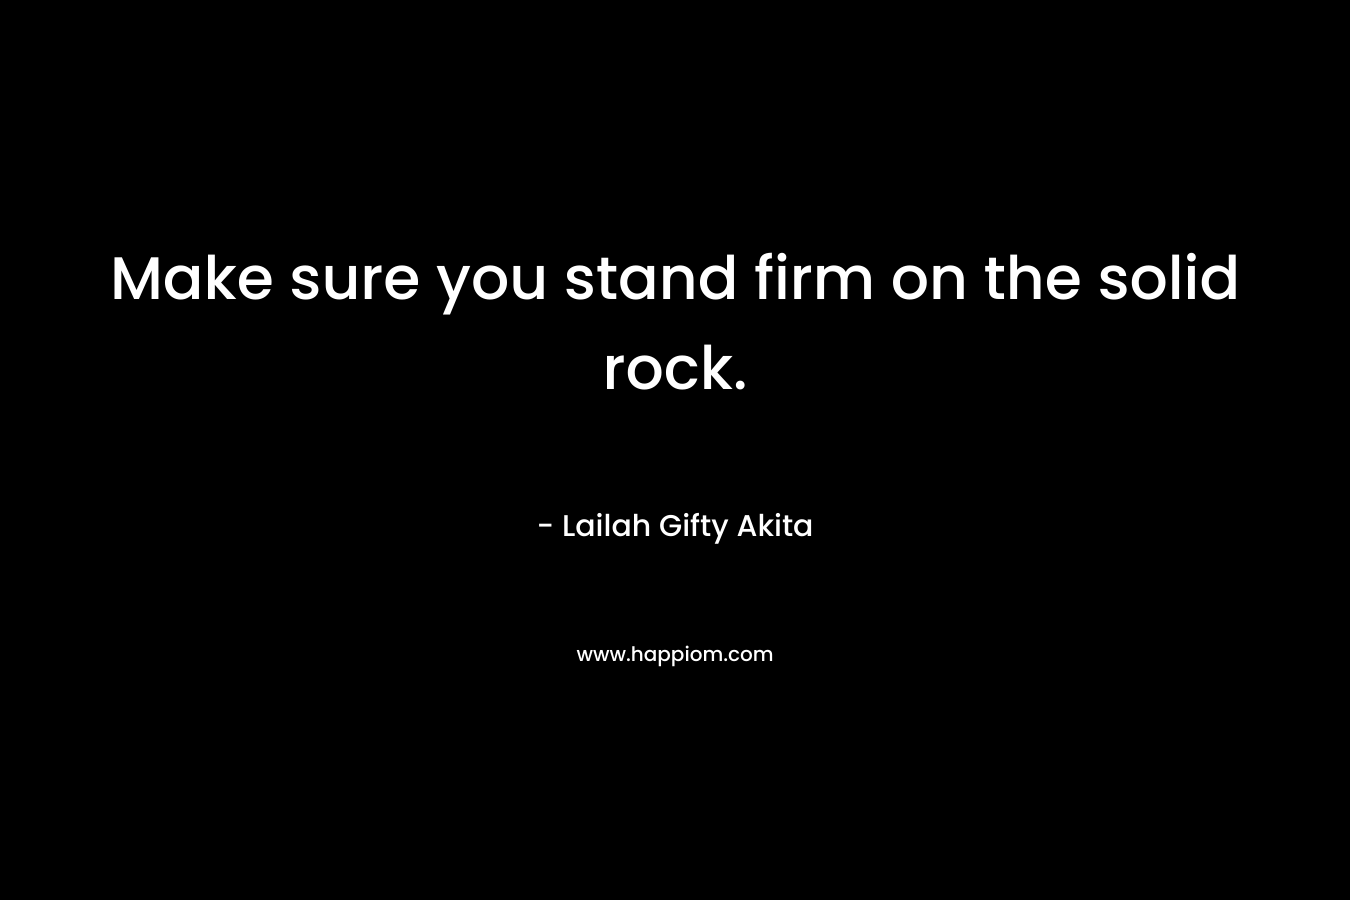 Make sure you stand firm on the solid rock.